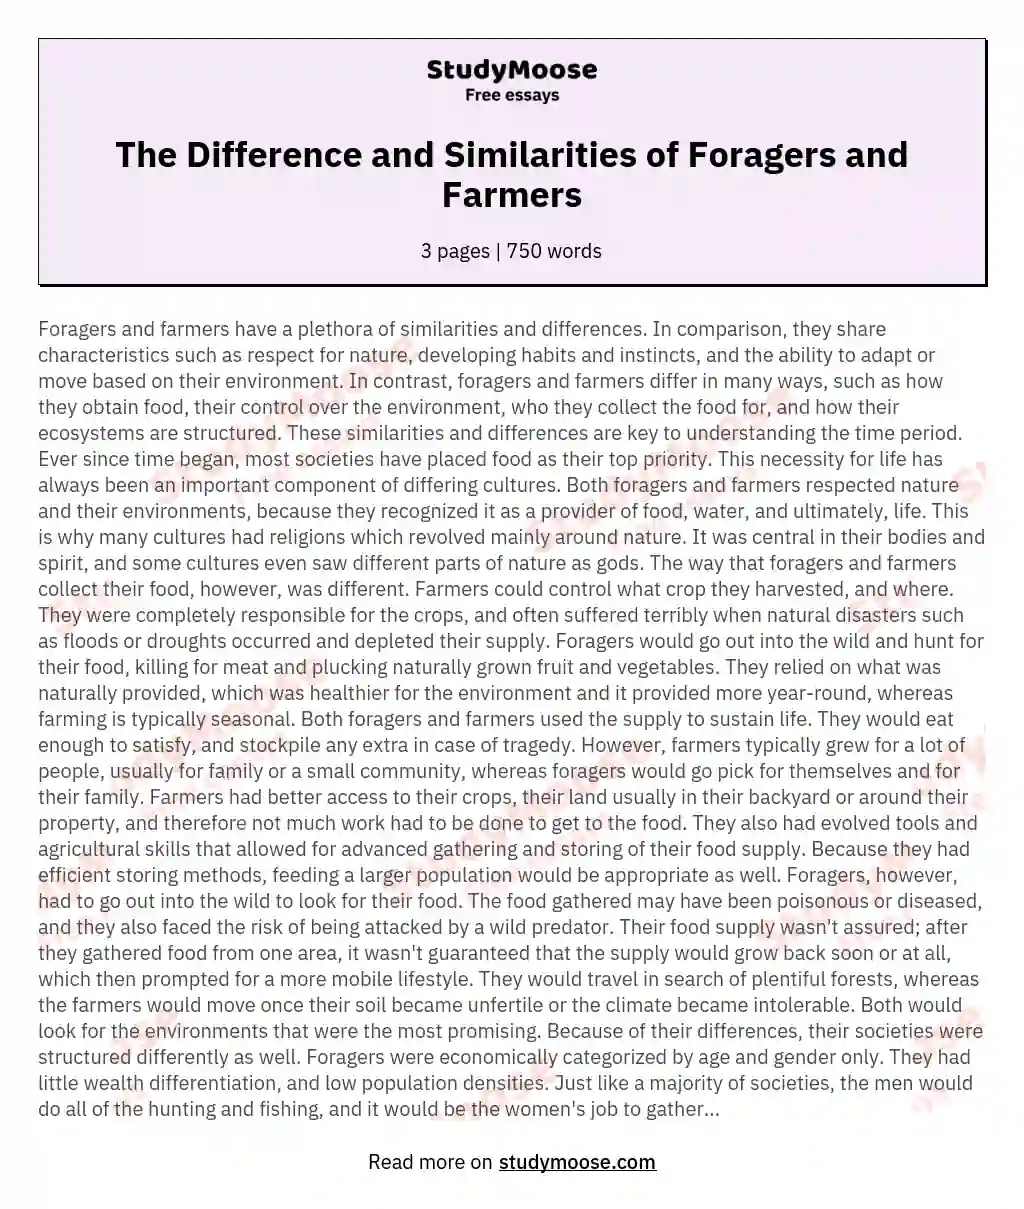 The Difference and Similarities of Foragers and Farmers essay